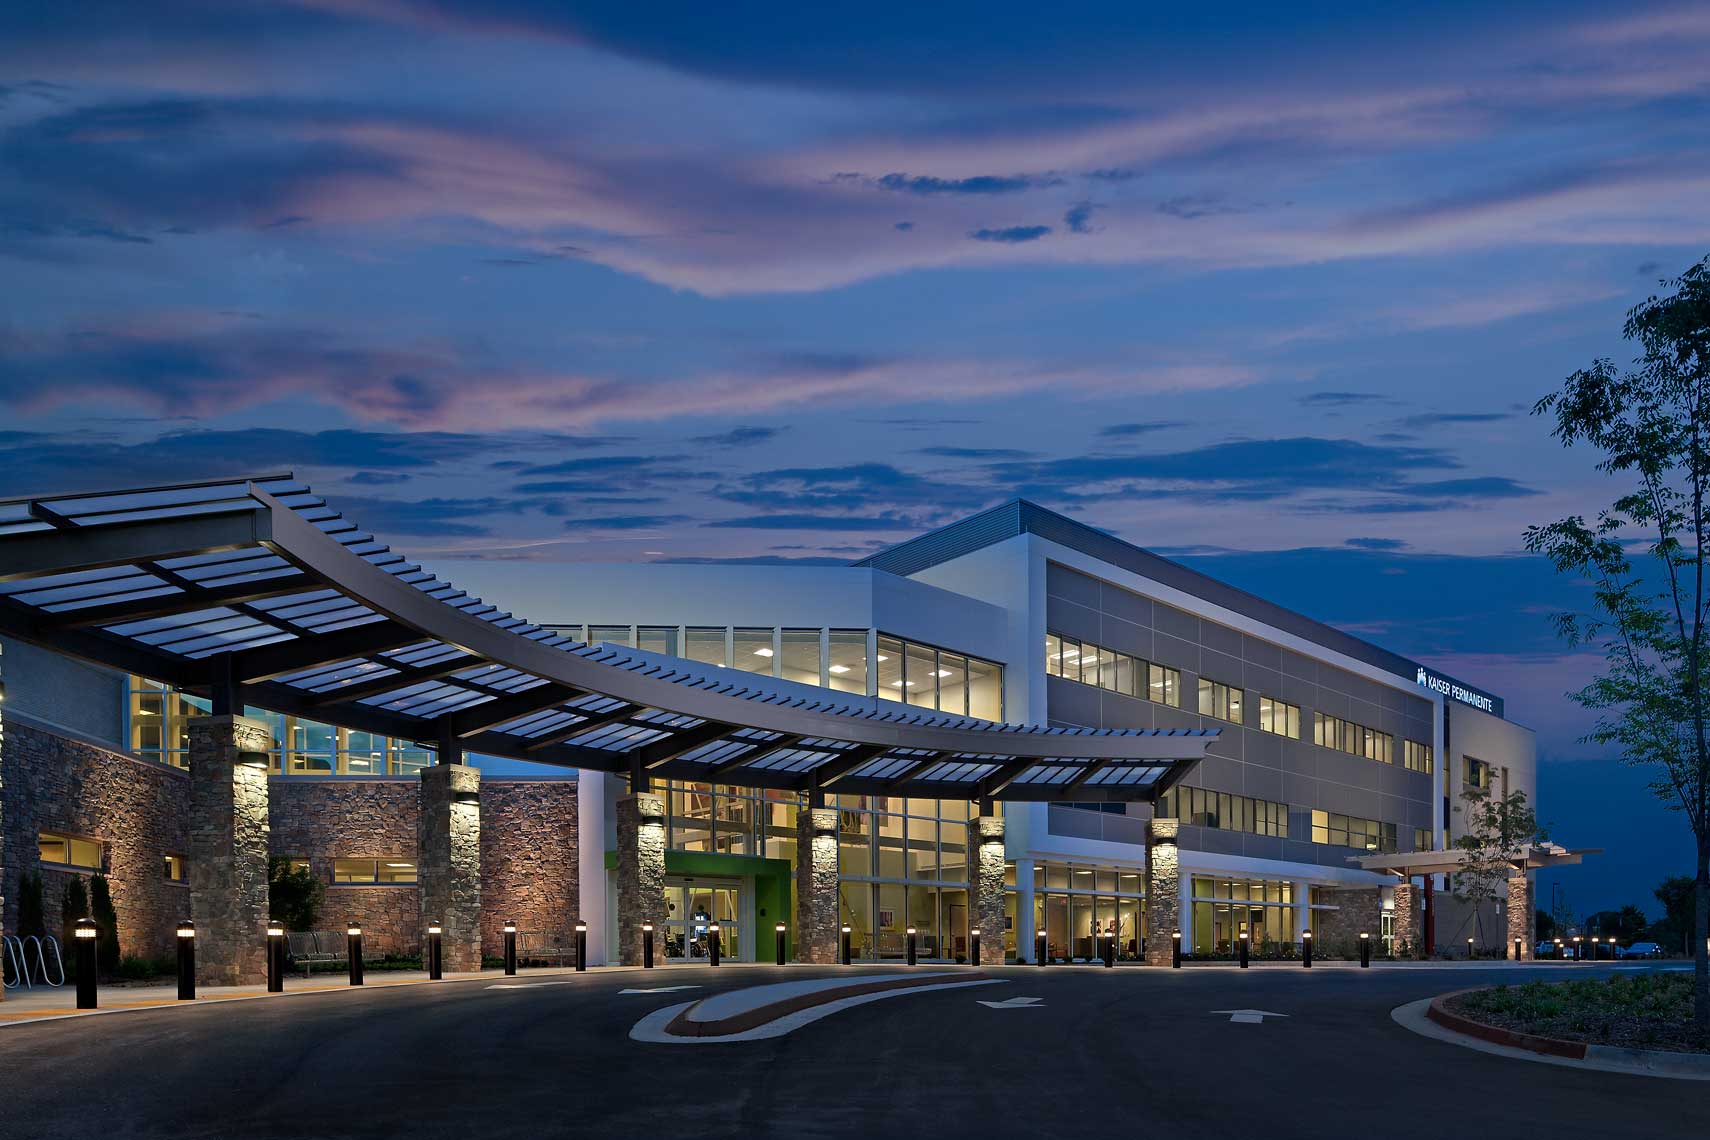 TownPark Comprehensive Medical Center in Kennesaw is shown to its best advantage in this twilight view